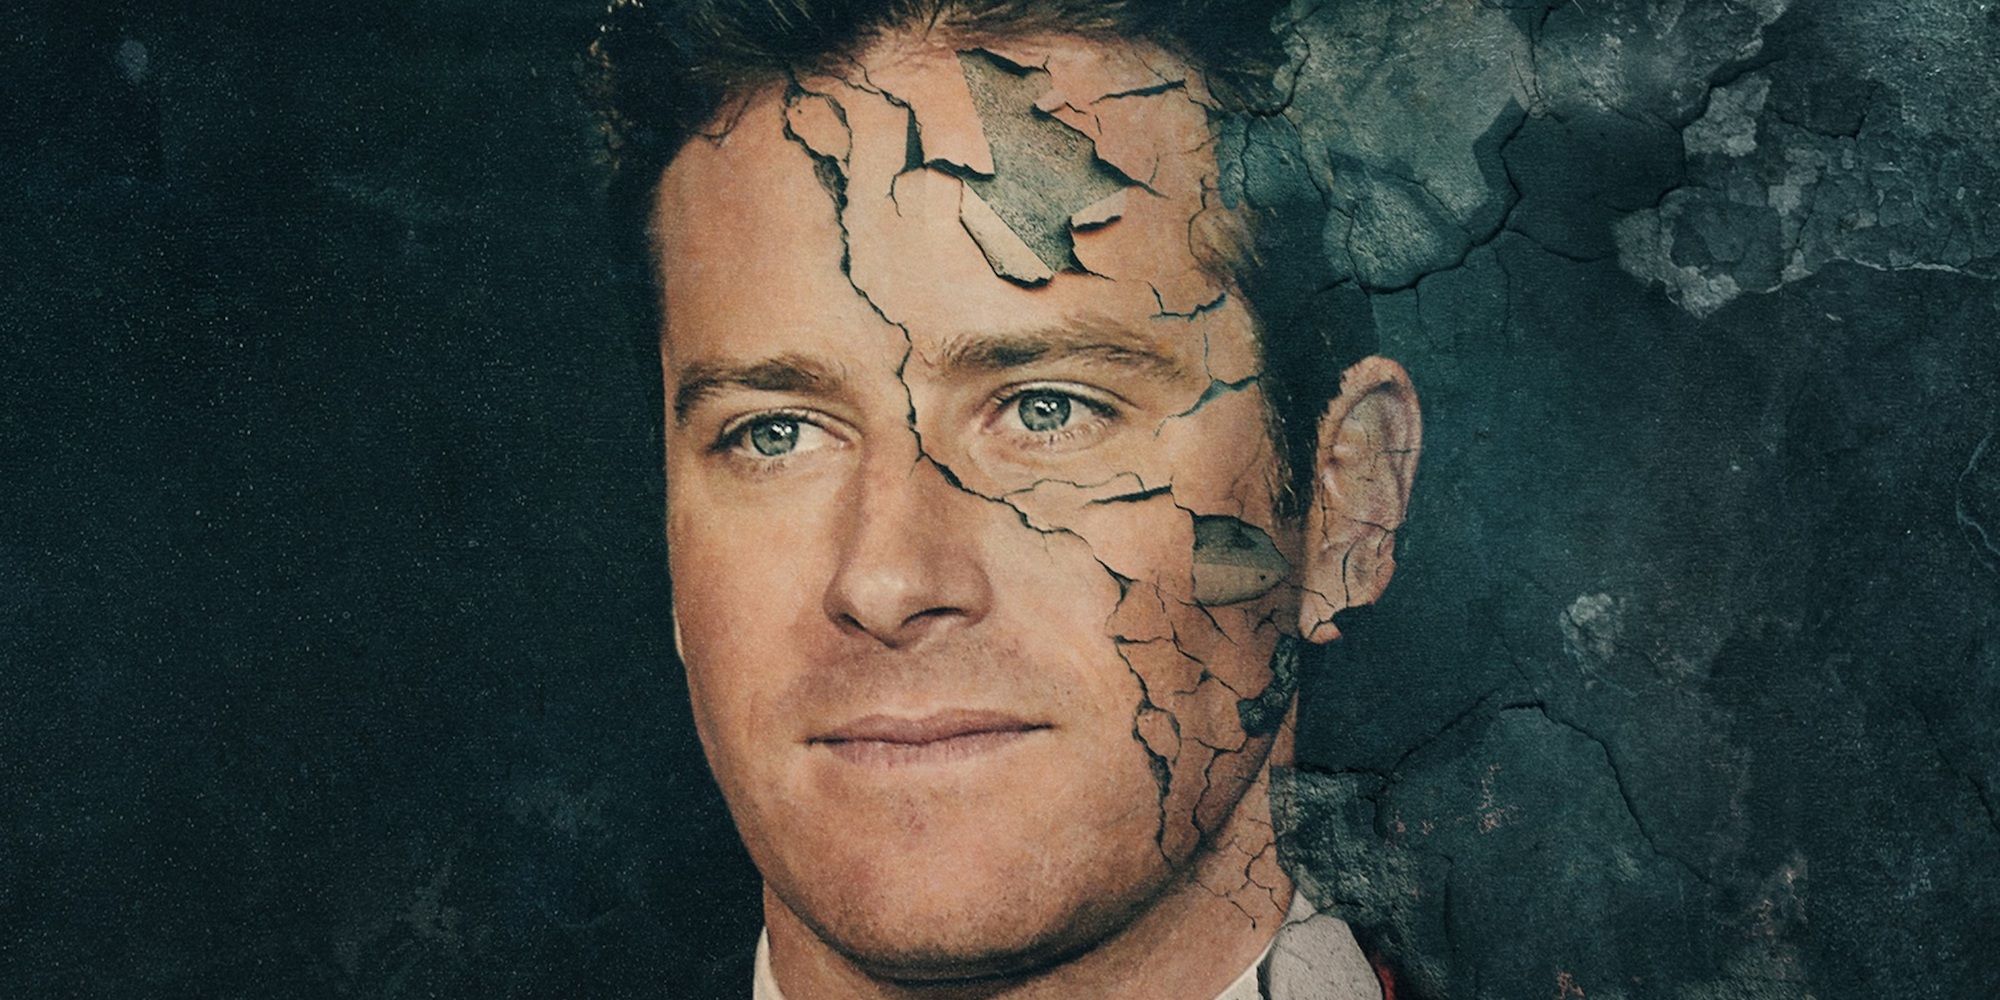 House of Hammer Poster with Armie Hammer